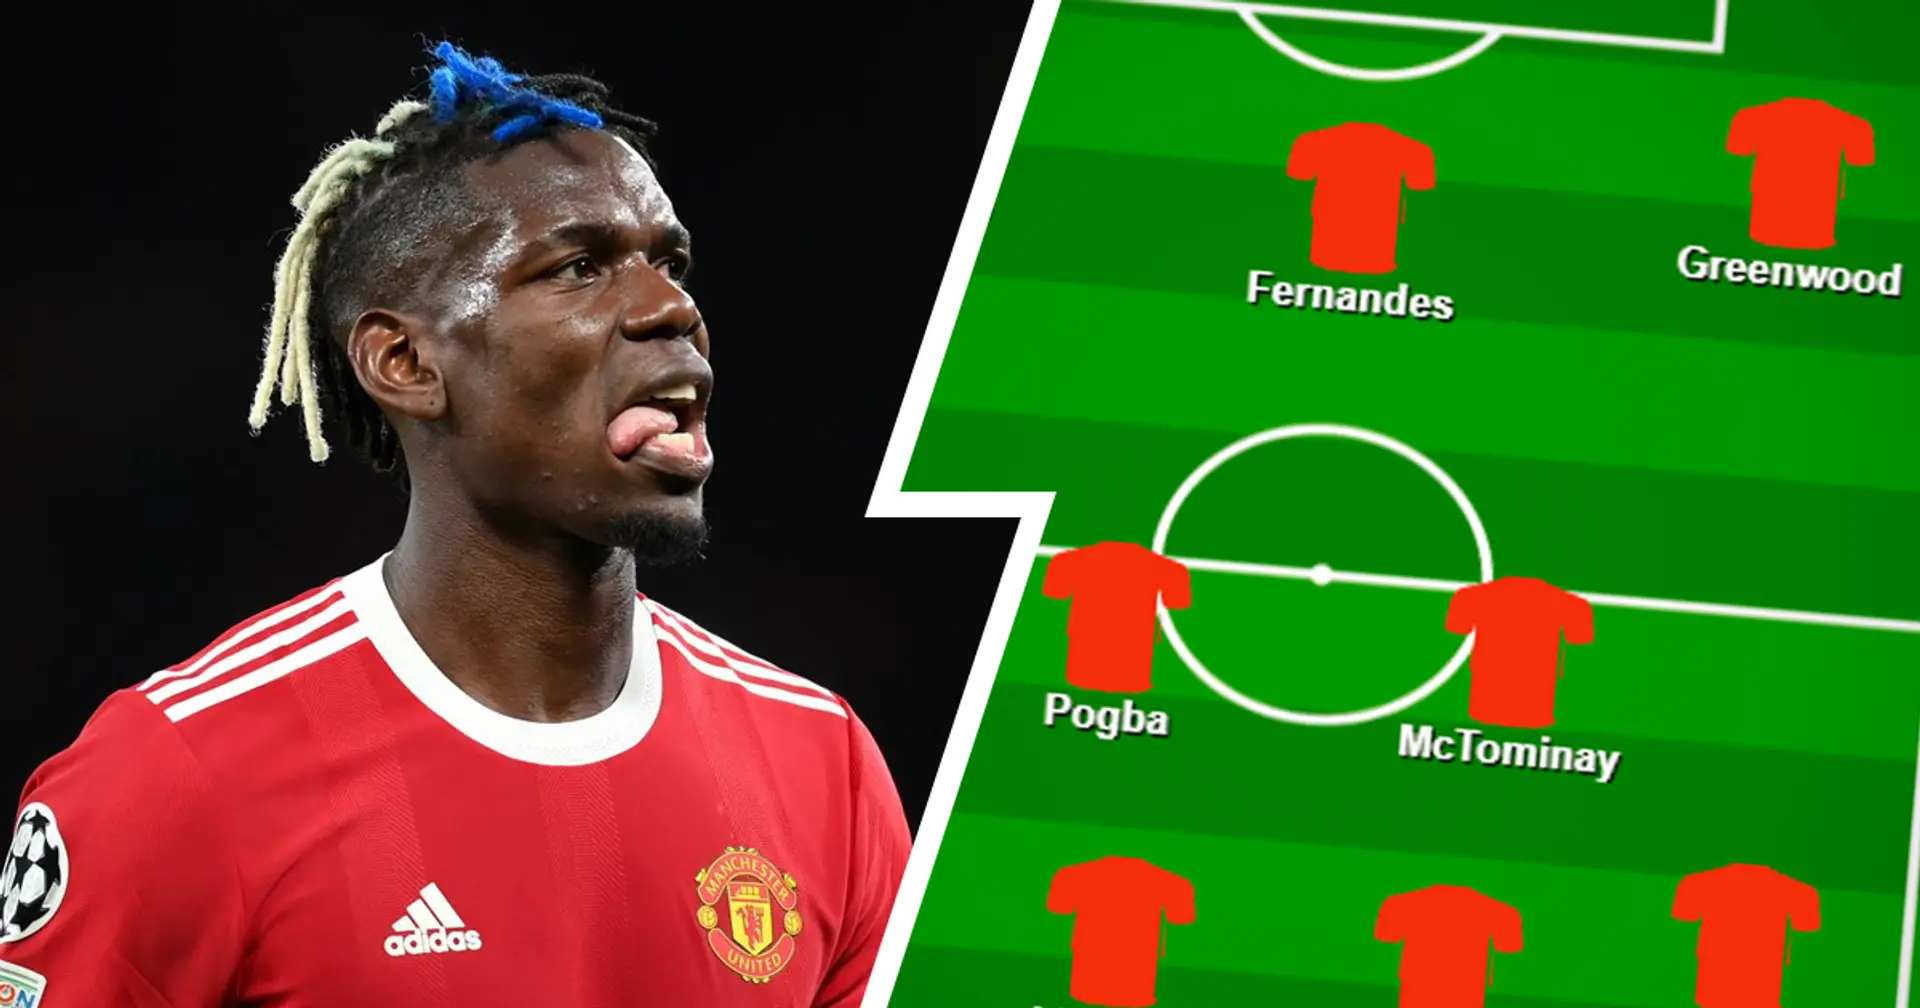 Pogba in midfield? Select your favourite Man United XI vs Leicester from 2 options